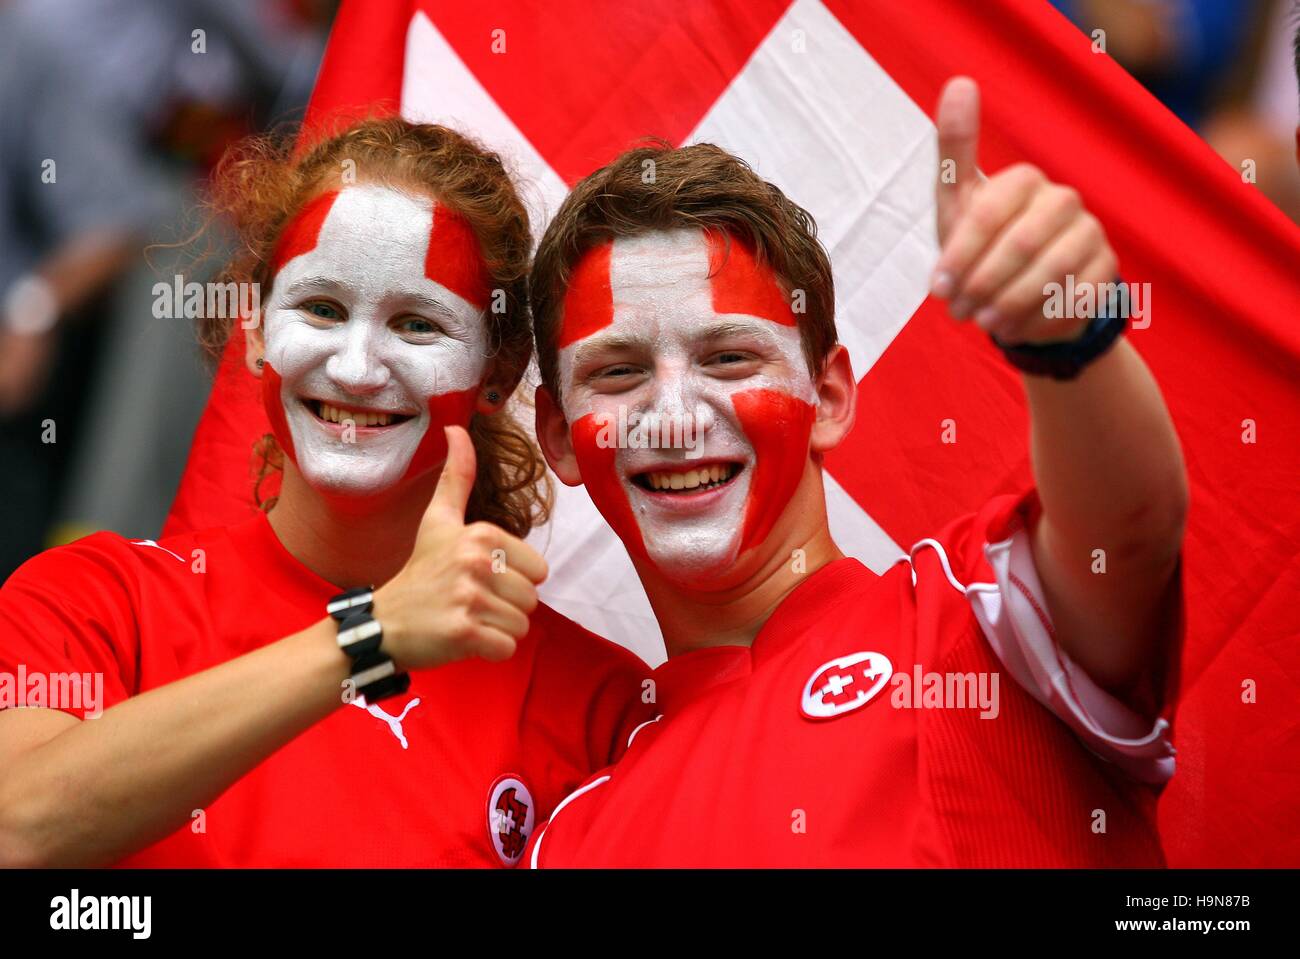 Swiss Football Fans Switzerland 19 High Resolution Stock Photography and  Images - Alamy